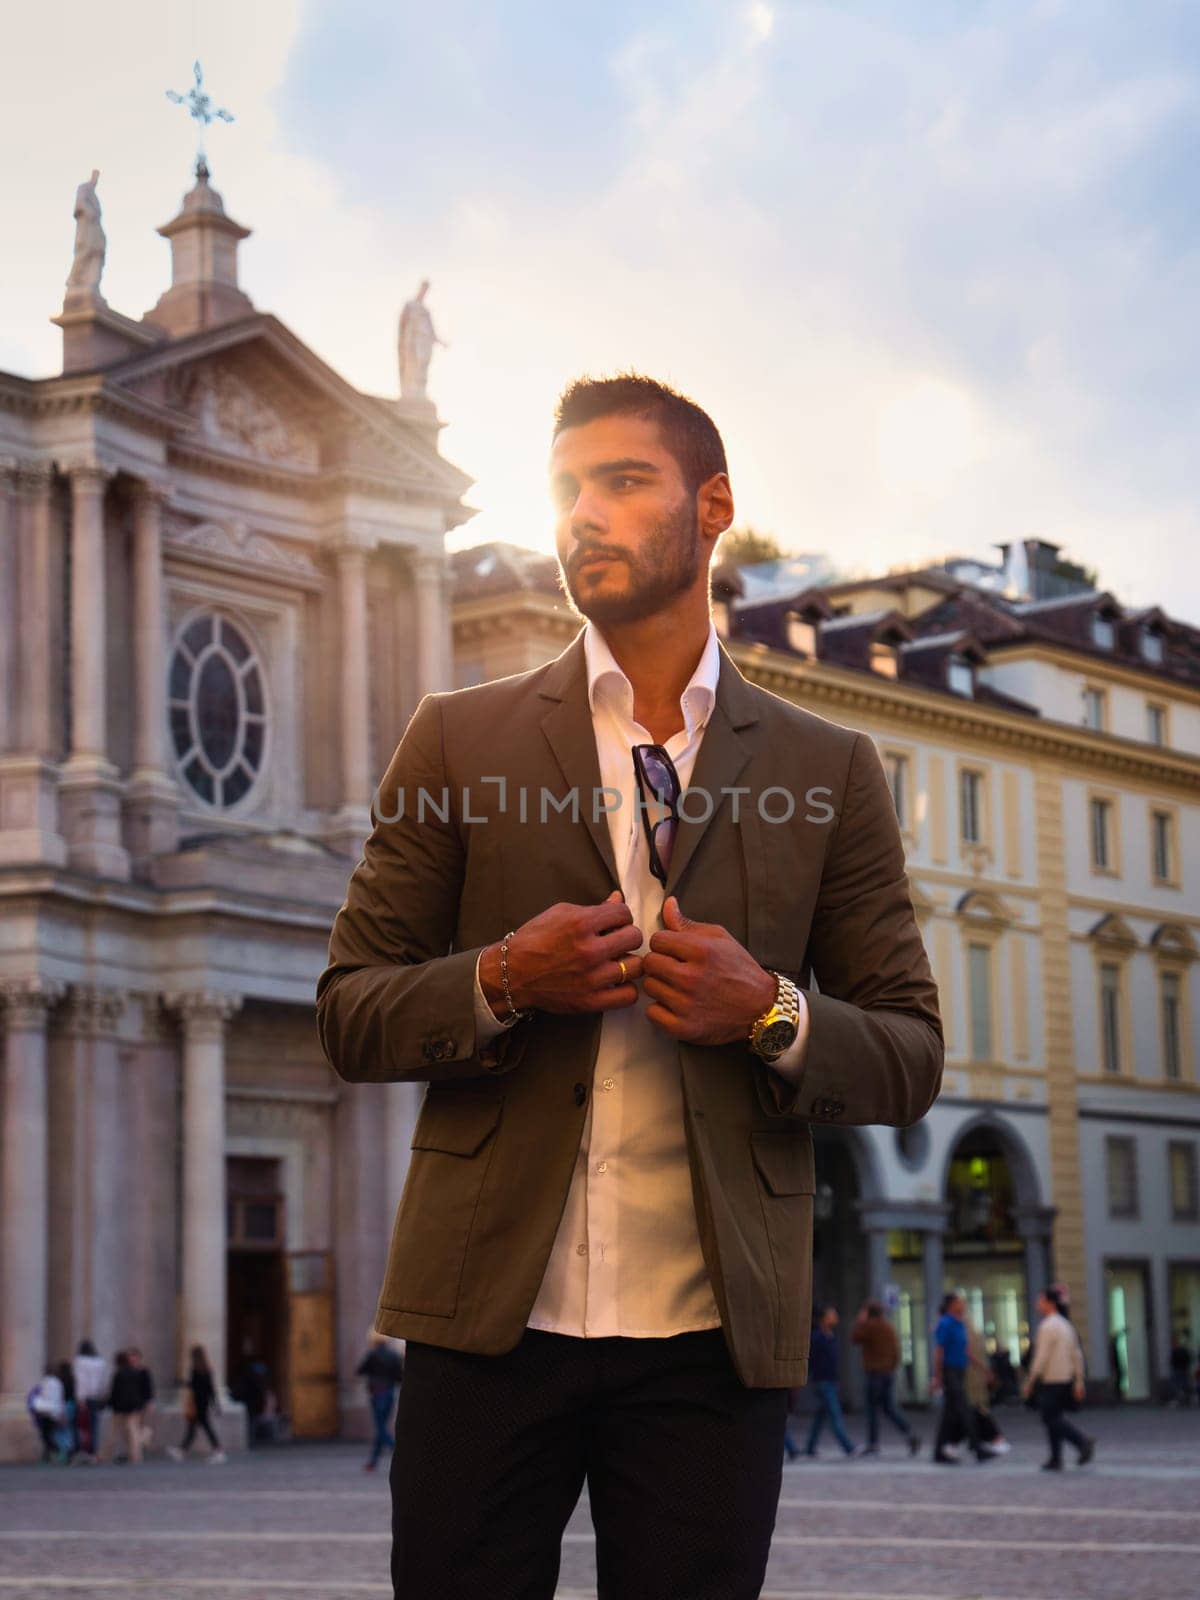 A man in a suit standing in front of a church in Piazza San Carlo in Turin, Italy. A businessman standing in a bustling city street under a clear sky.